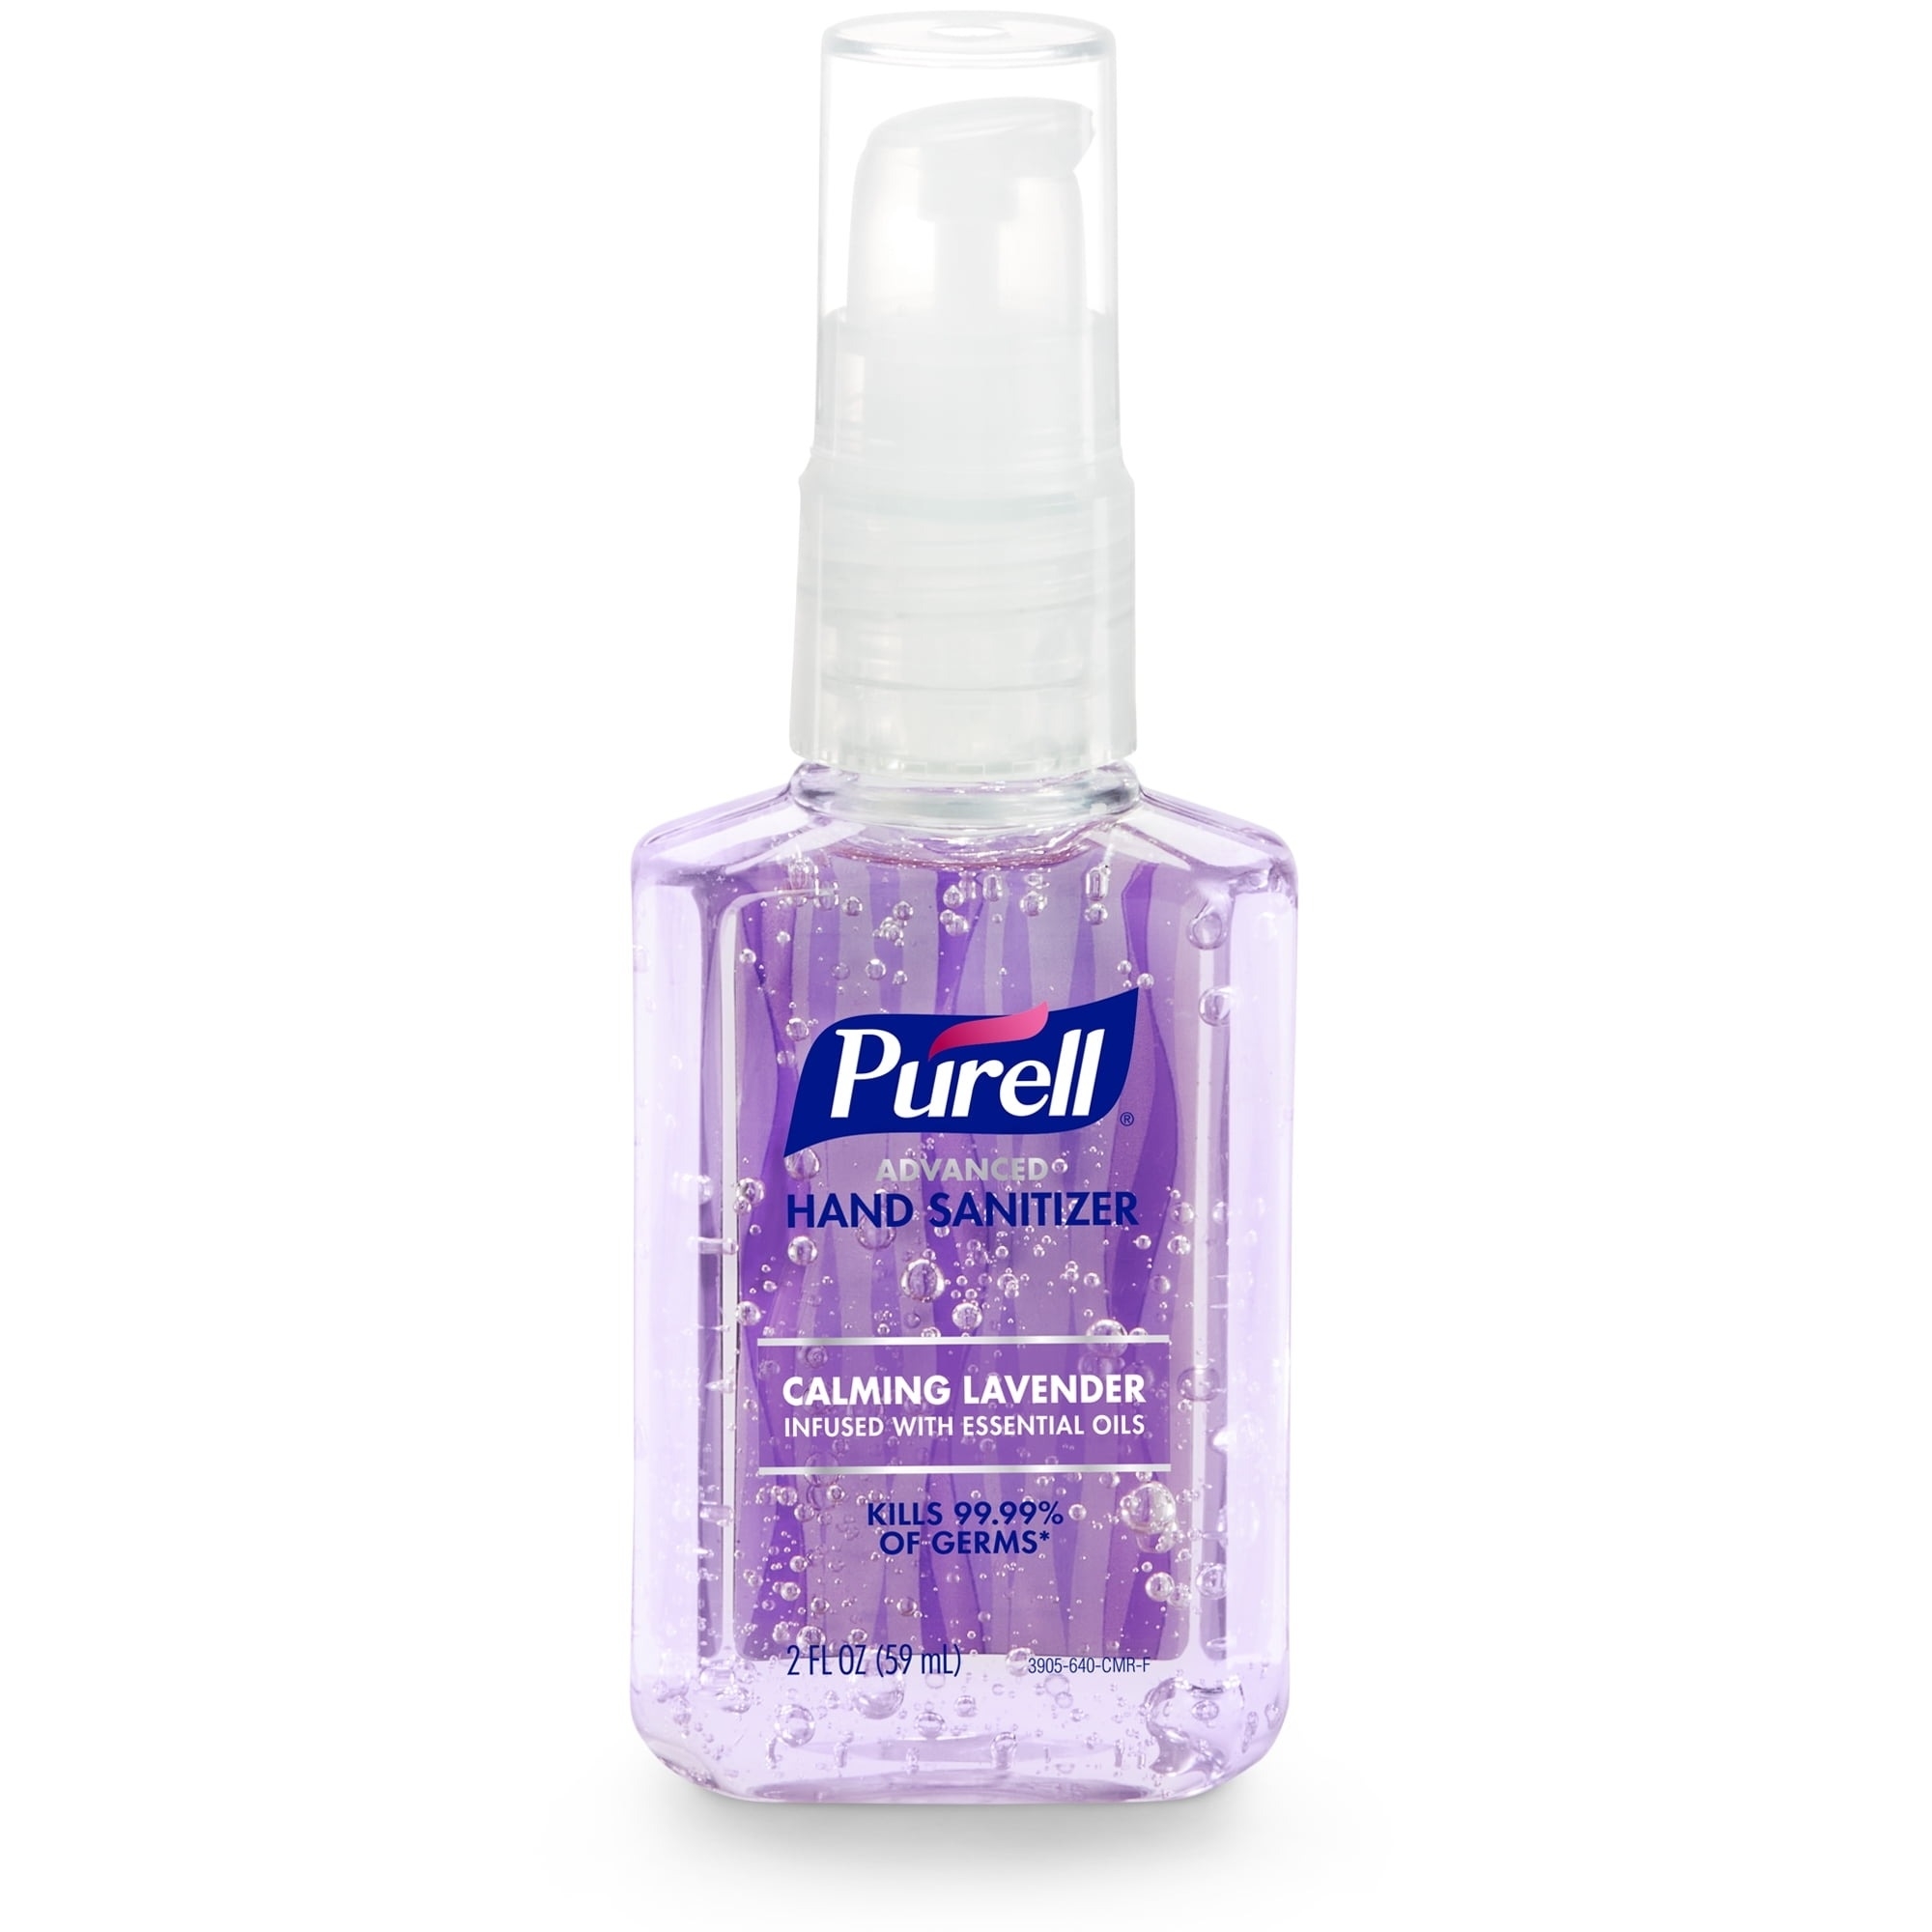 Bottle of Purell hand sanitizer with lavender, text highlights killing 99.99% of germs